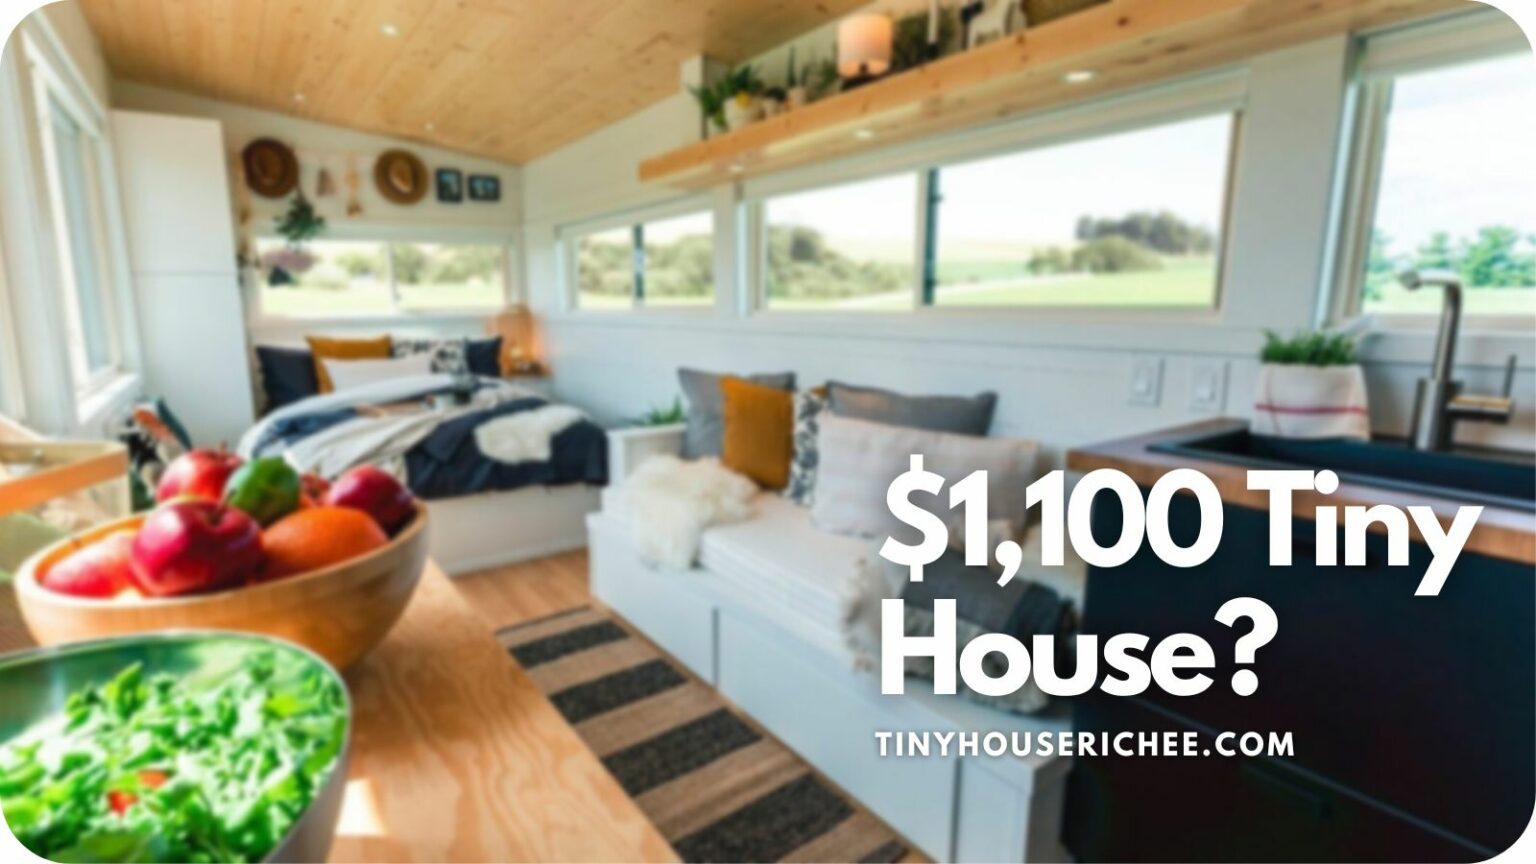 This IKEA Tiny House Costs Just $1100! [Photos]